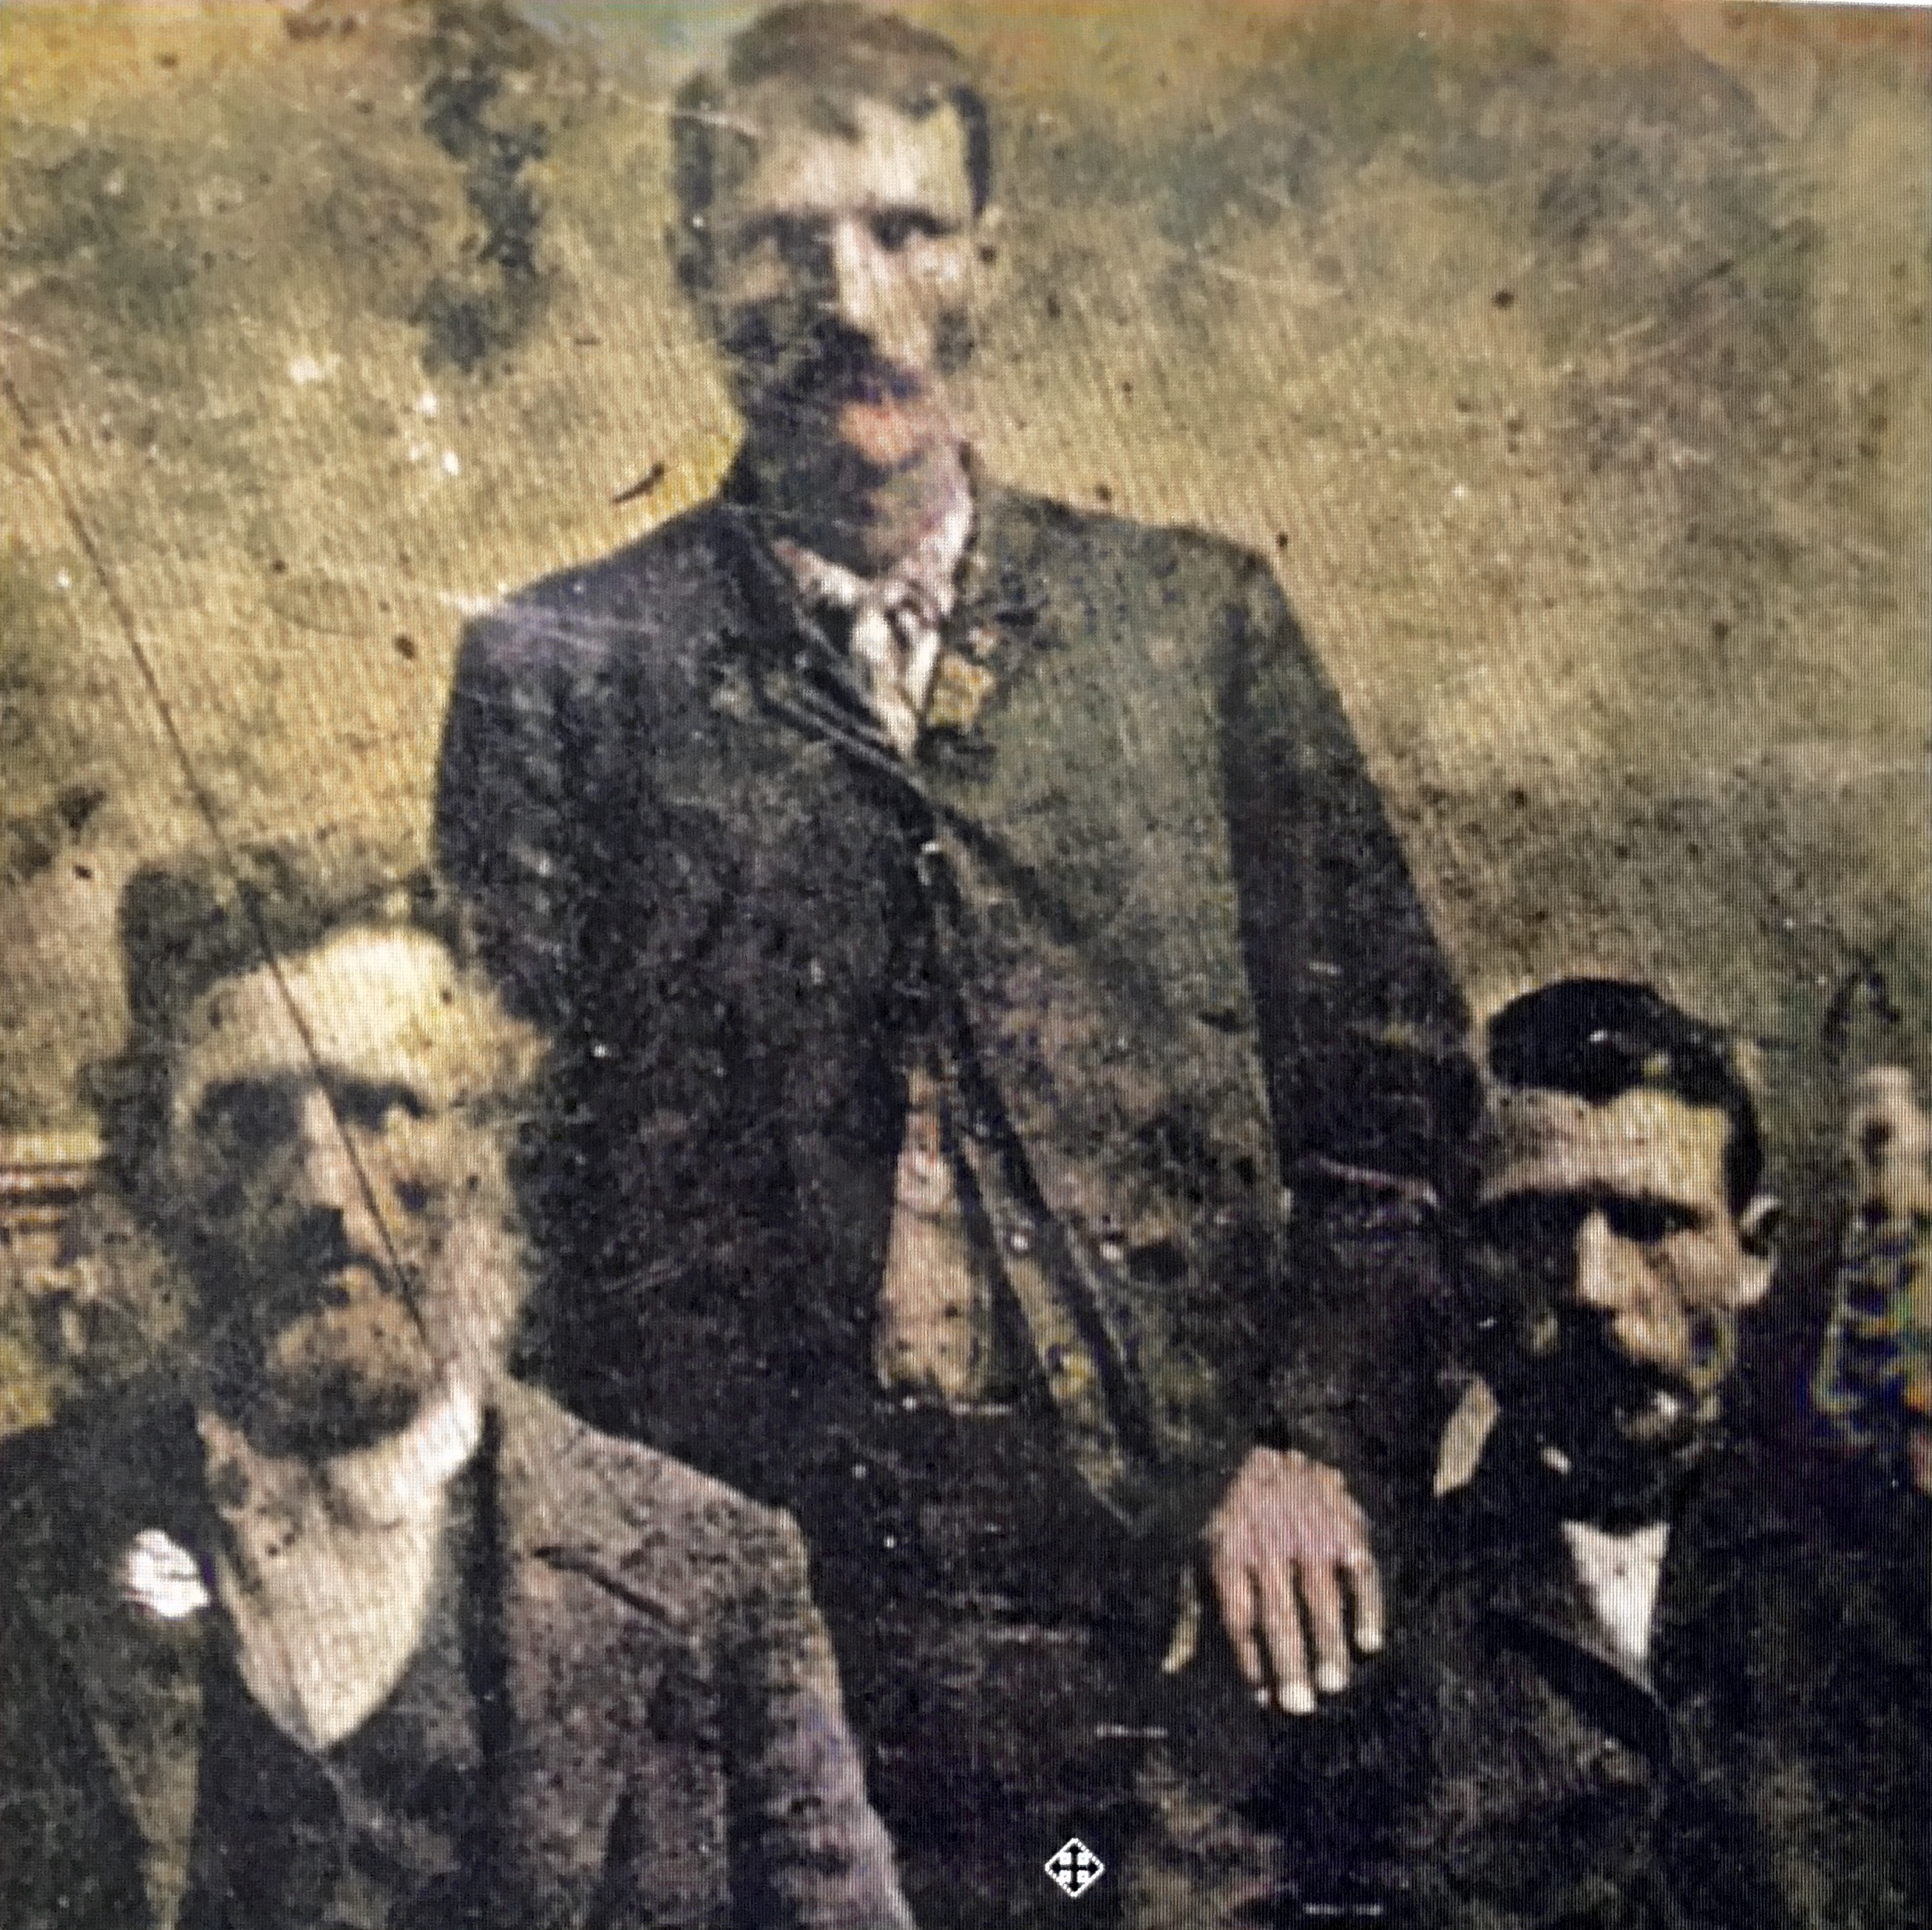 Seaborn Jefferson Thornton (far left) father of Seaborn Fletcher Thornton, b. 1866, Sudie’s dad.

George W and Lucious Columbus are other two.

Sudie b. 1893